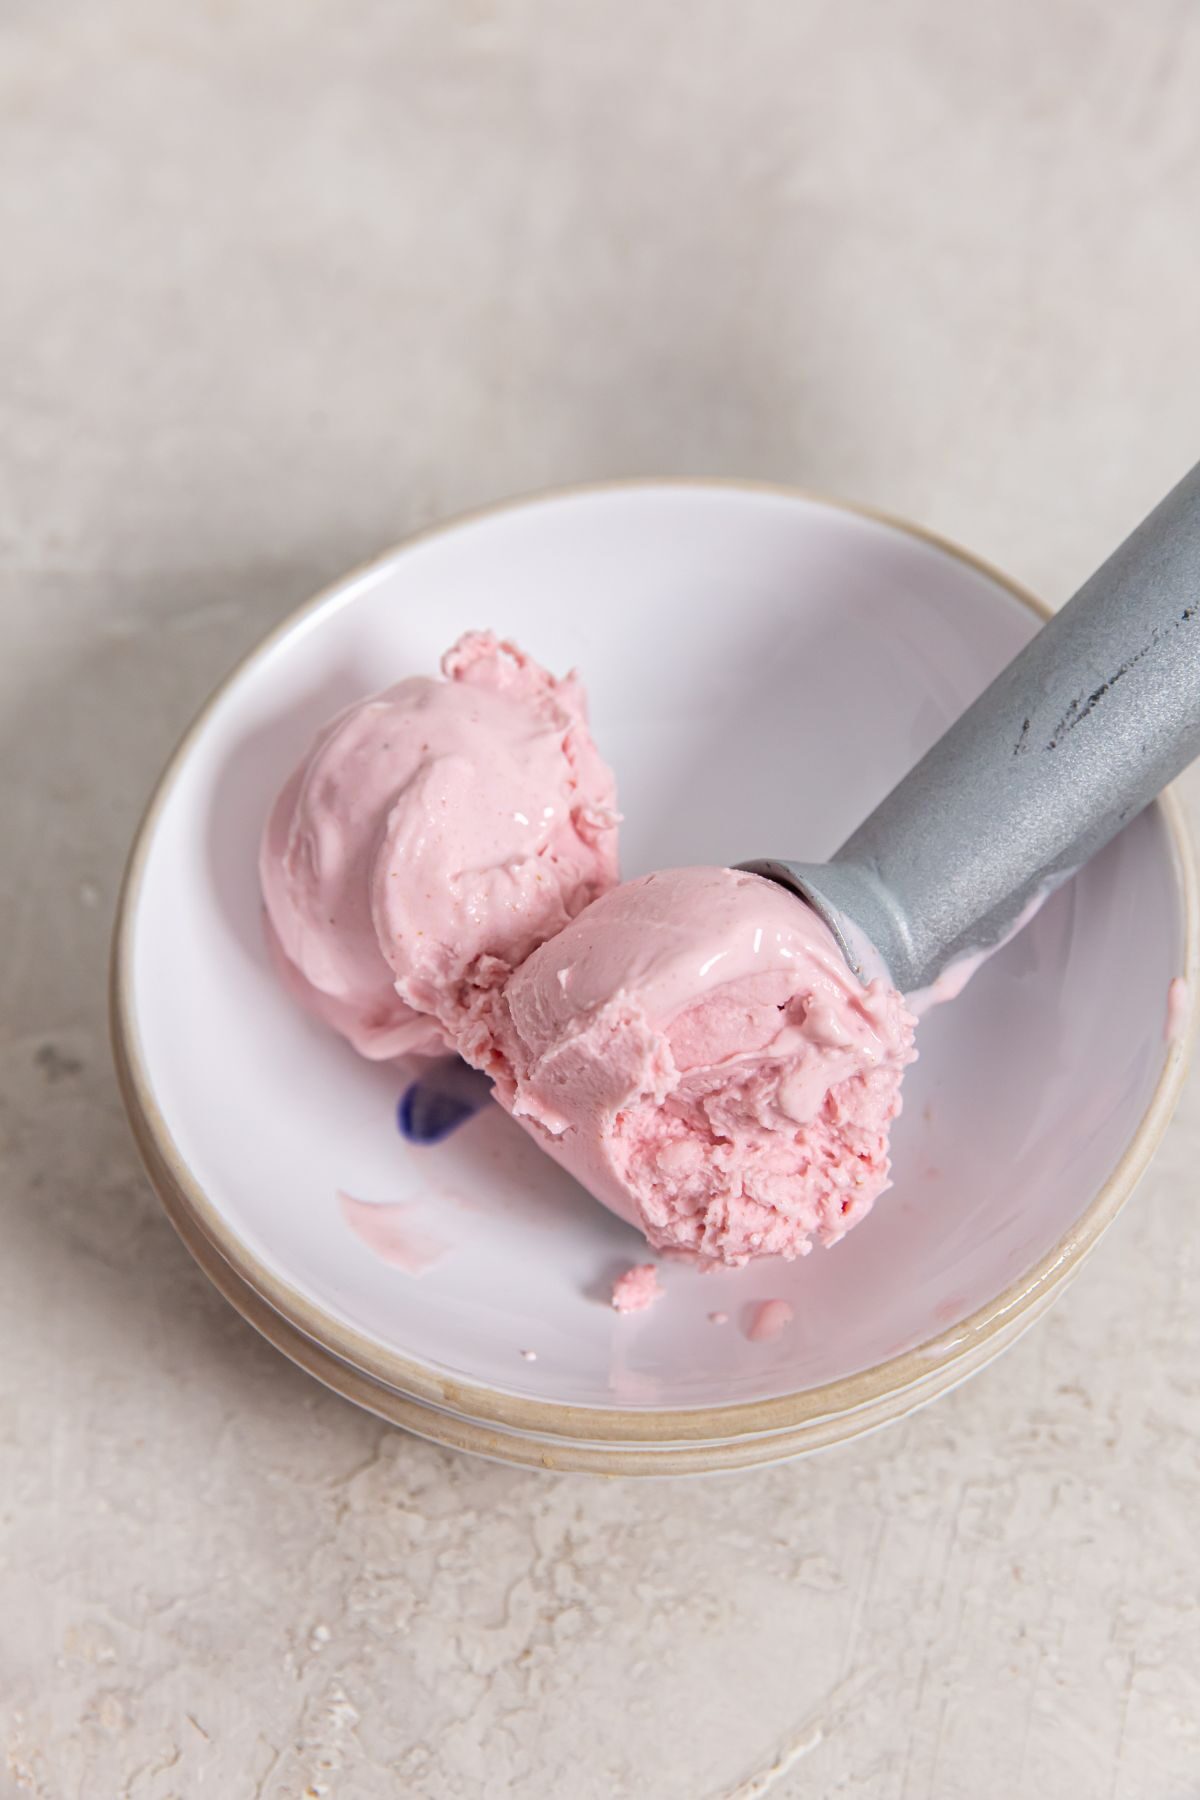 Ninja Creami Strawberry ice cream in a small white bowl with an ice cream scoop